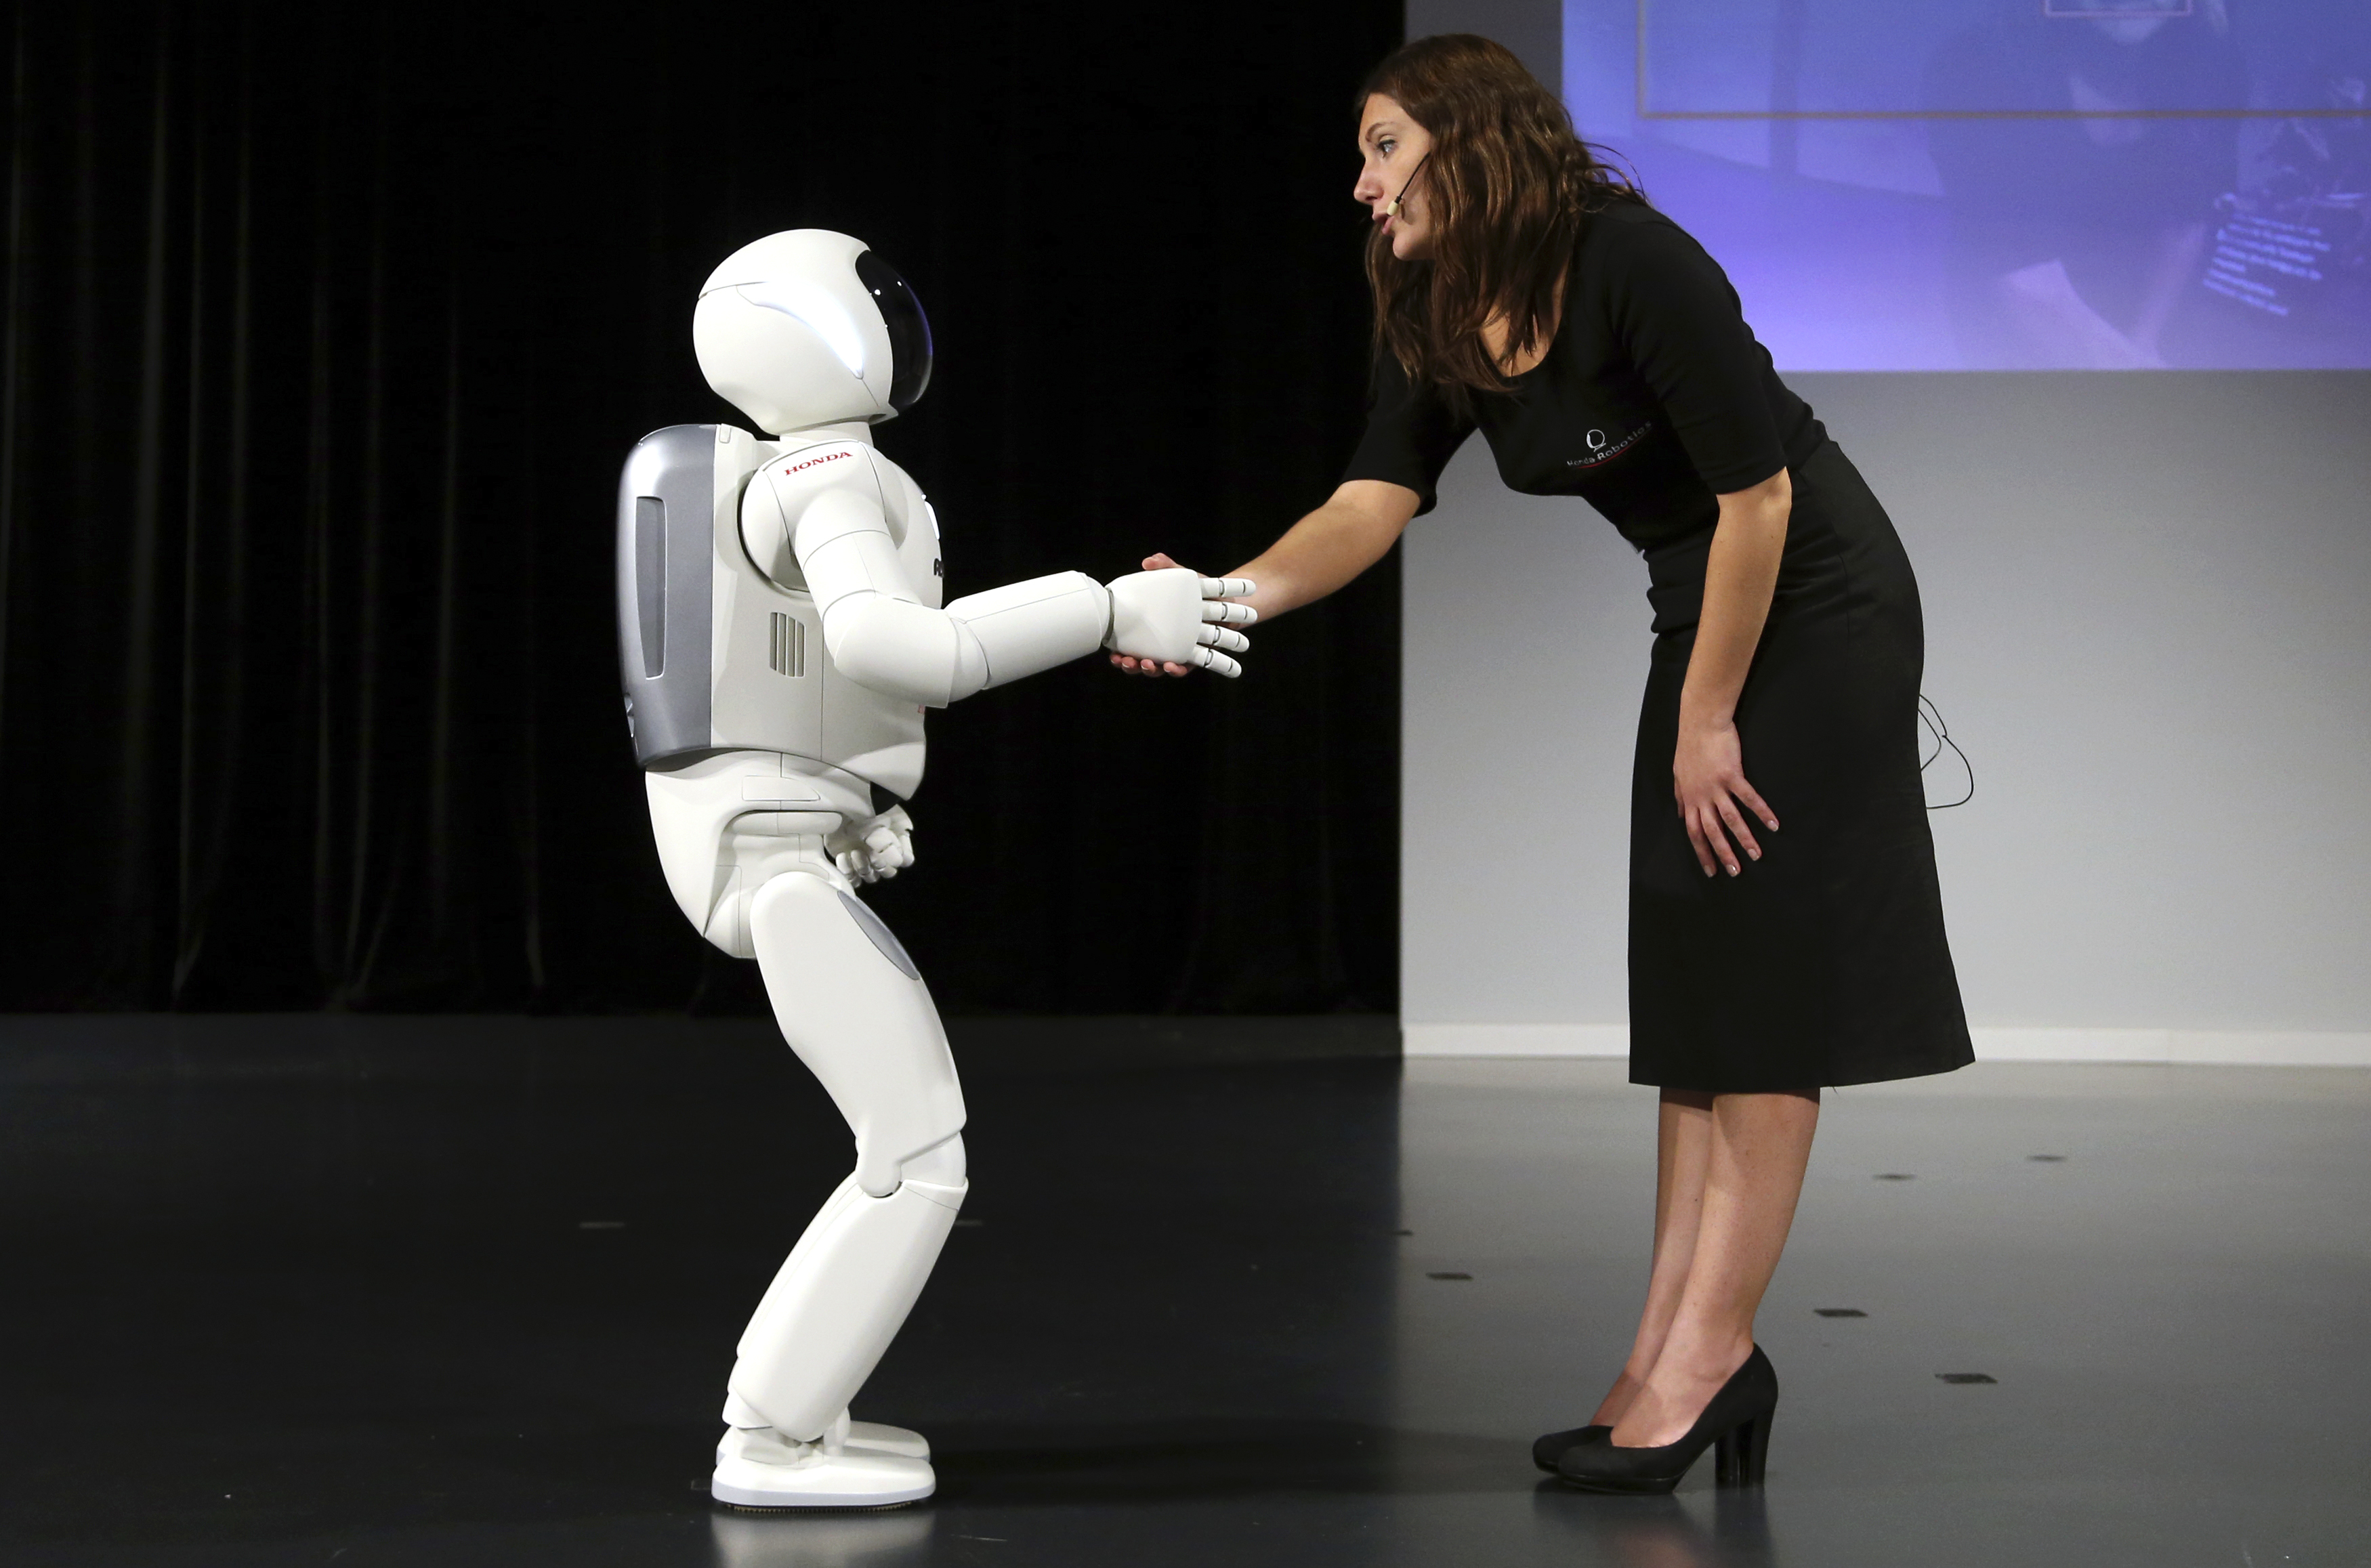 Honda's latest version of the Asimo humanoid robot shakes hands during a presentation in Zaventem near Brussels July 16, 2014. Honda introduced in Belgium an improved version of its Asimo humanoid robot that it says has enhanced intelligence and hand dexterity, and is able to run at a speed of some 9 kilometres per hour (5.6 miles per hour). (Francois Lenoir&mdash;REUTERS)